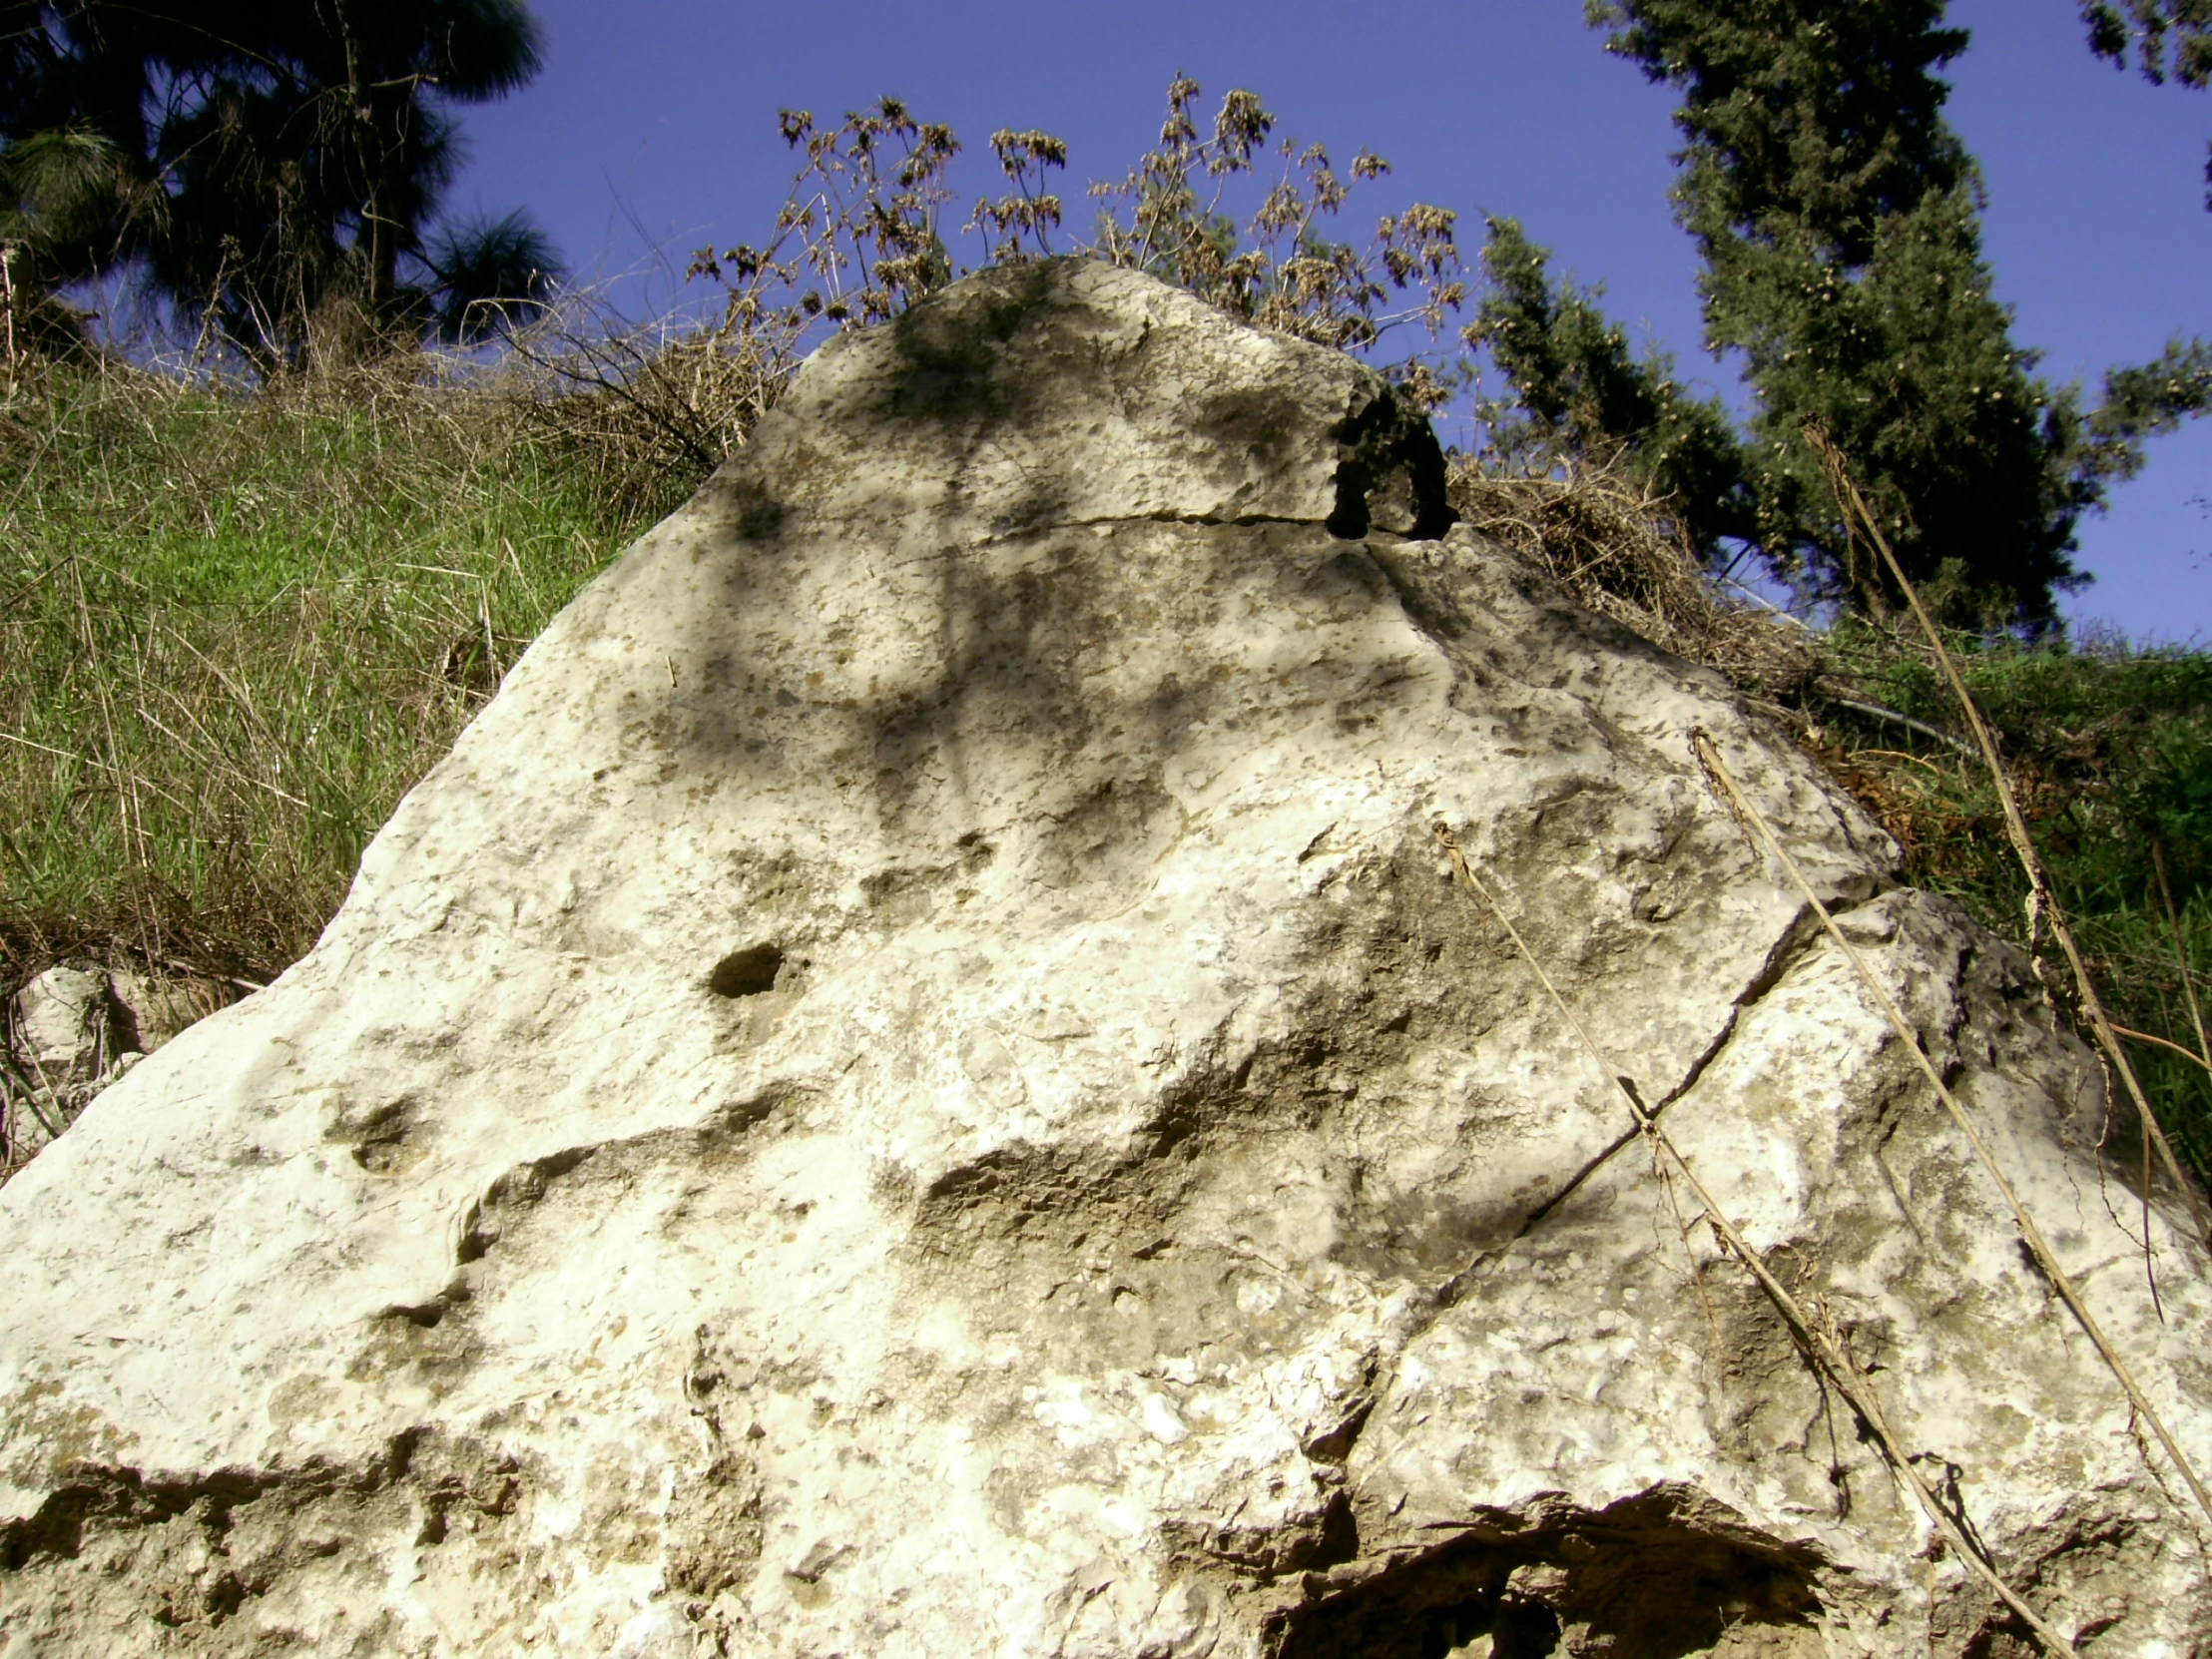 a rock surrounded by vegetation and a blue sky